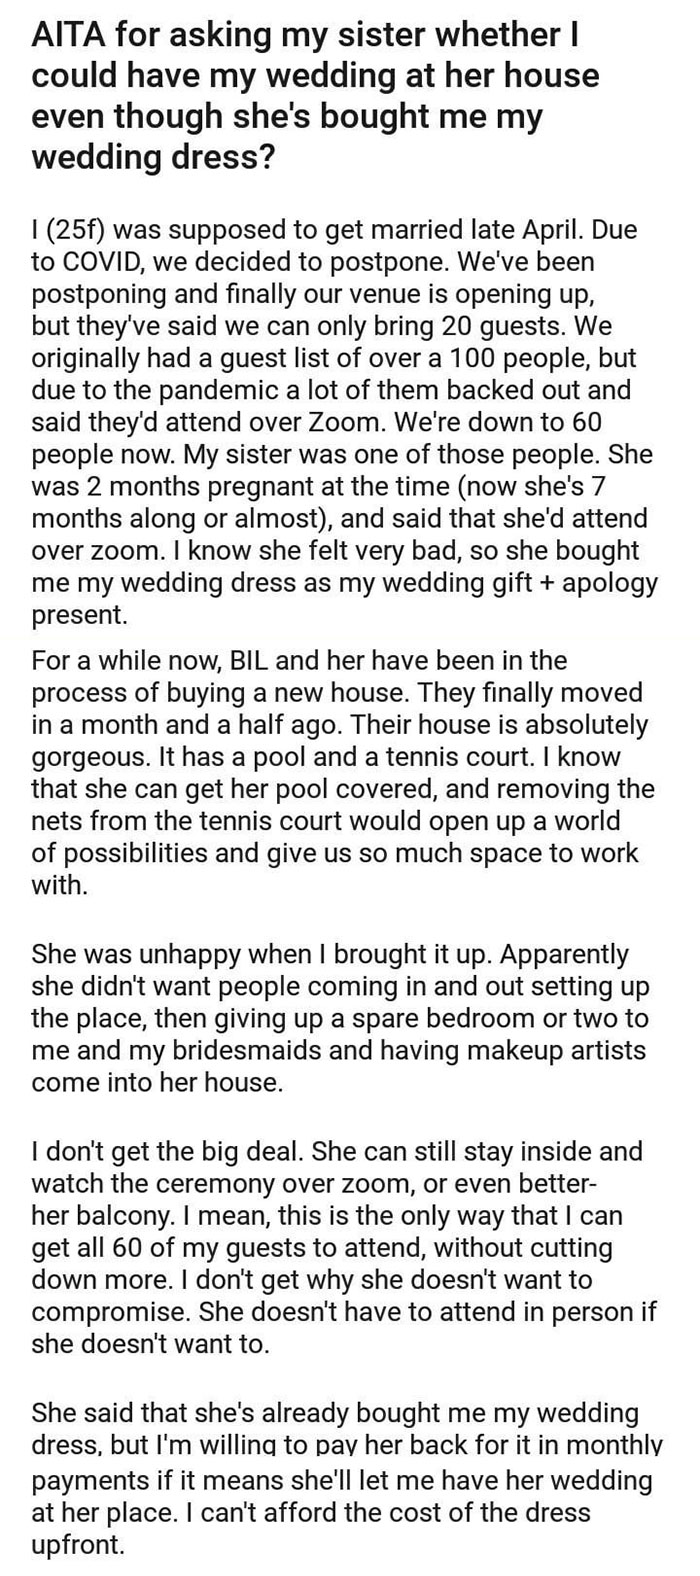 Bridezilla Wants Her Sister's House For Her Wedding